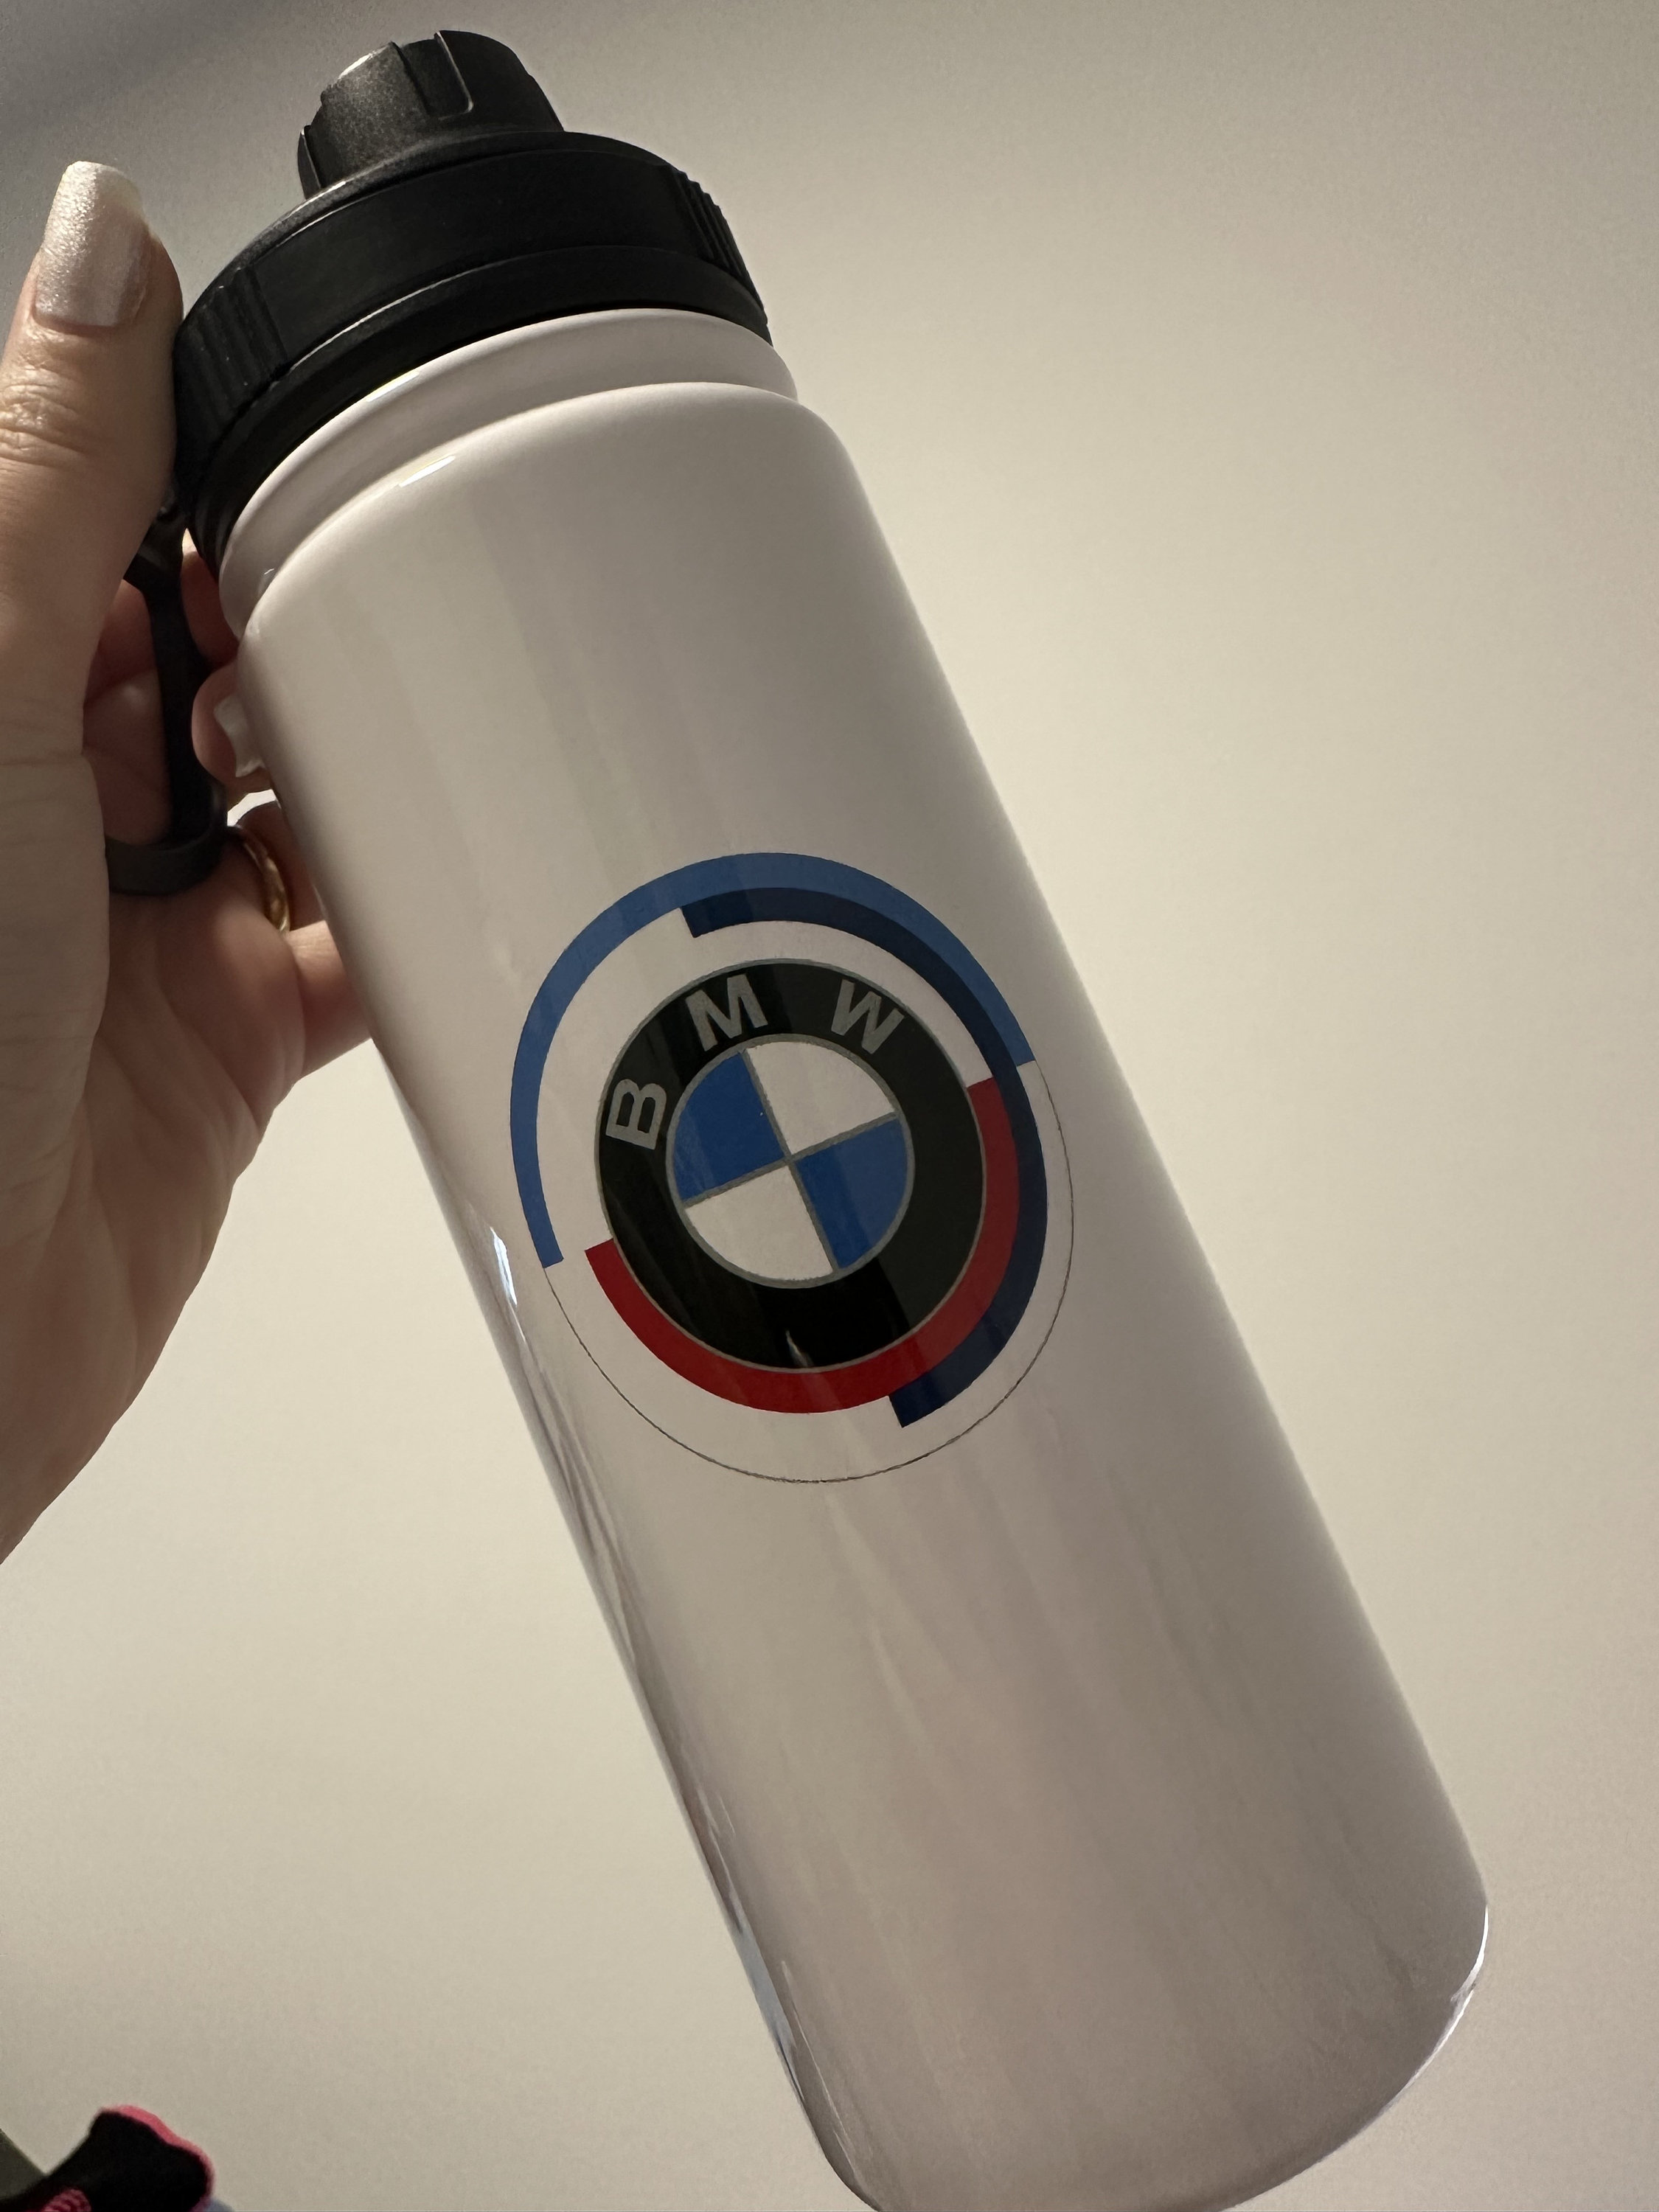 BMW Tumbler, Coffee Mug / Water Bottle, Stainless Steel, Insulated Hot /  Cold. 